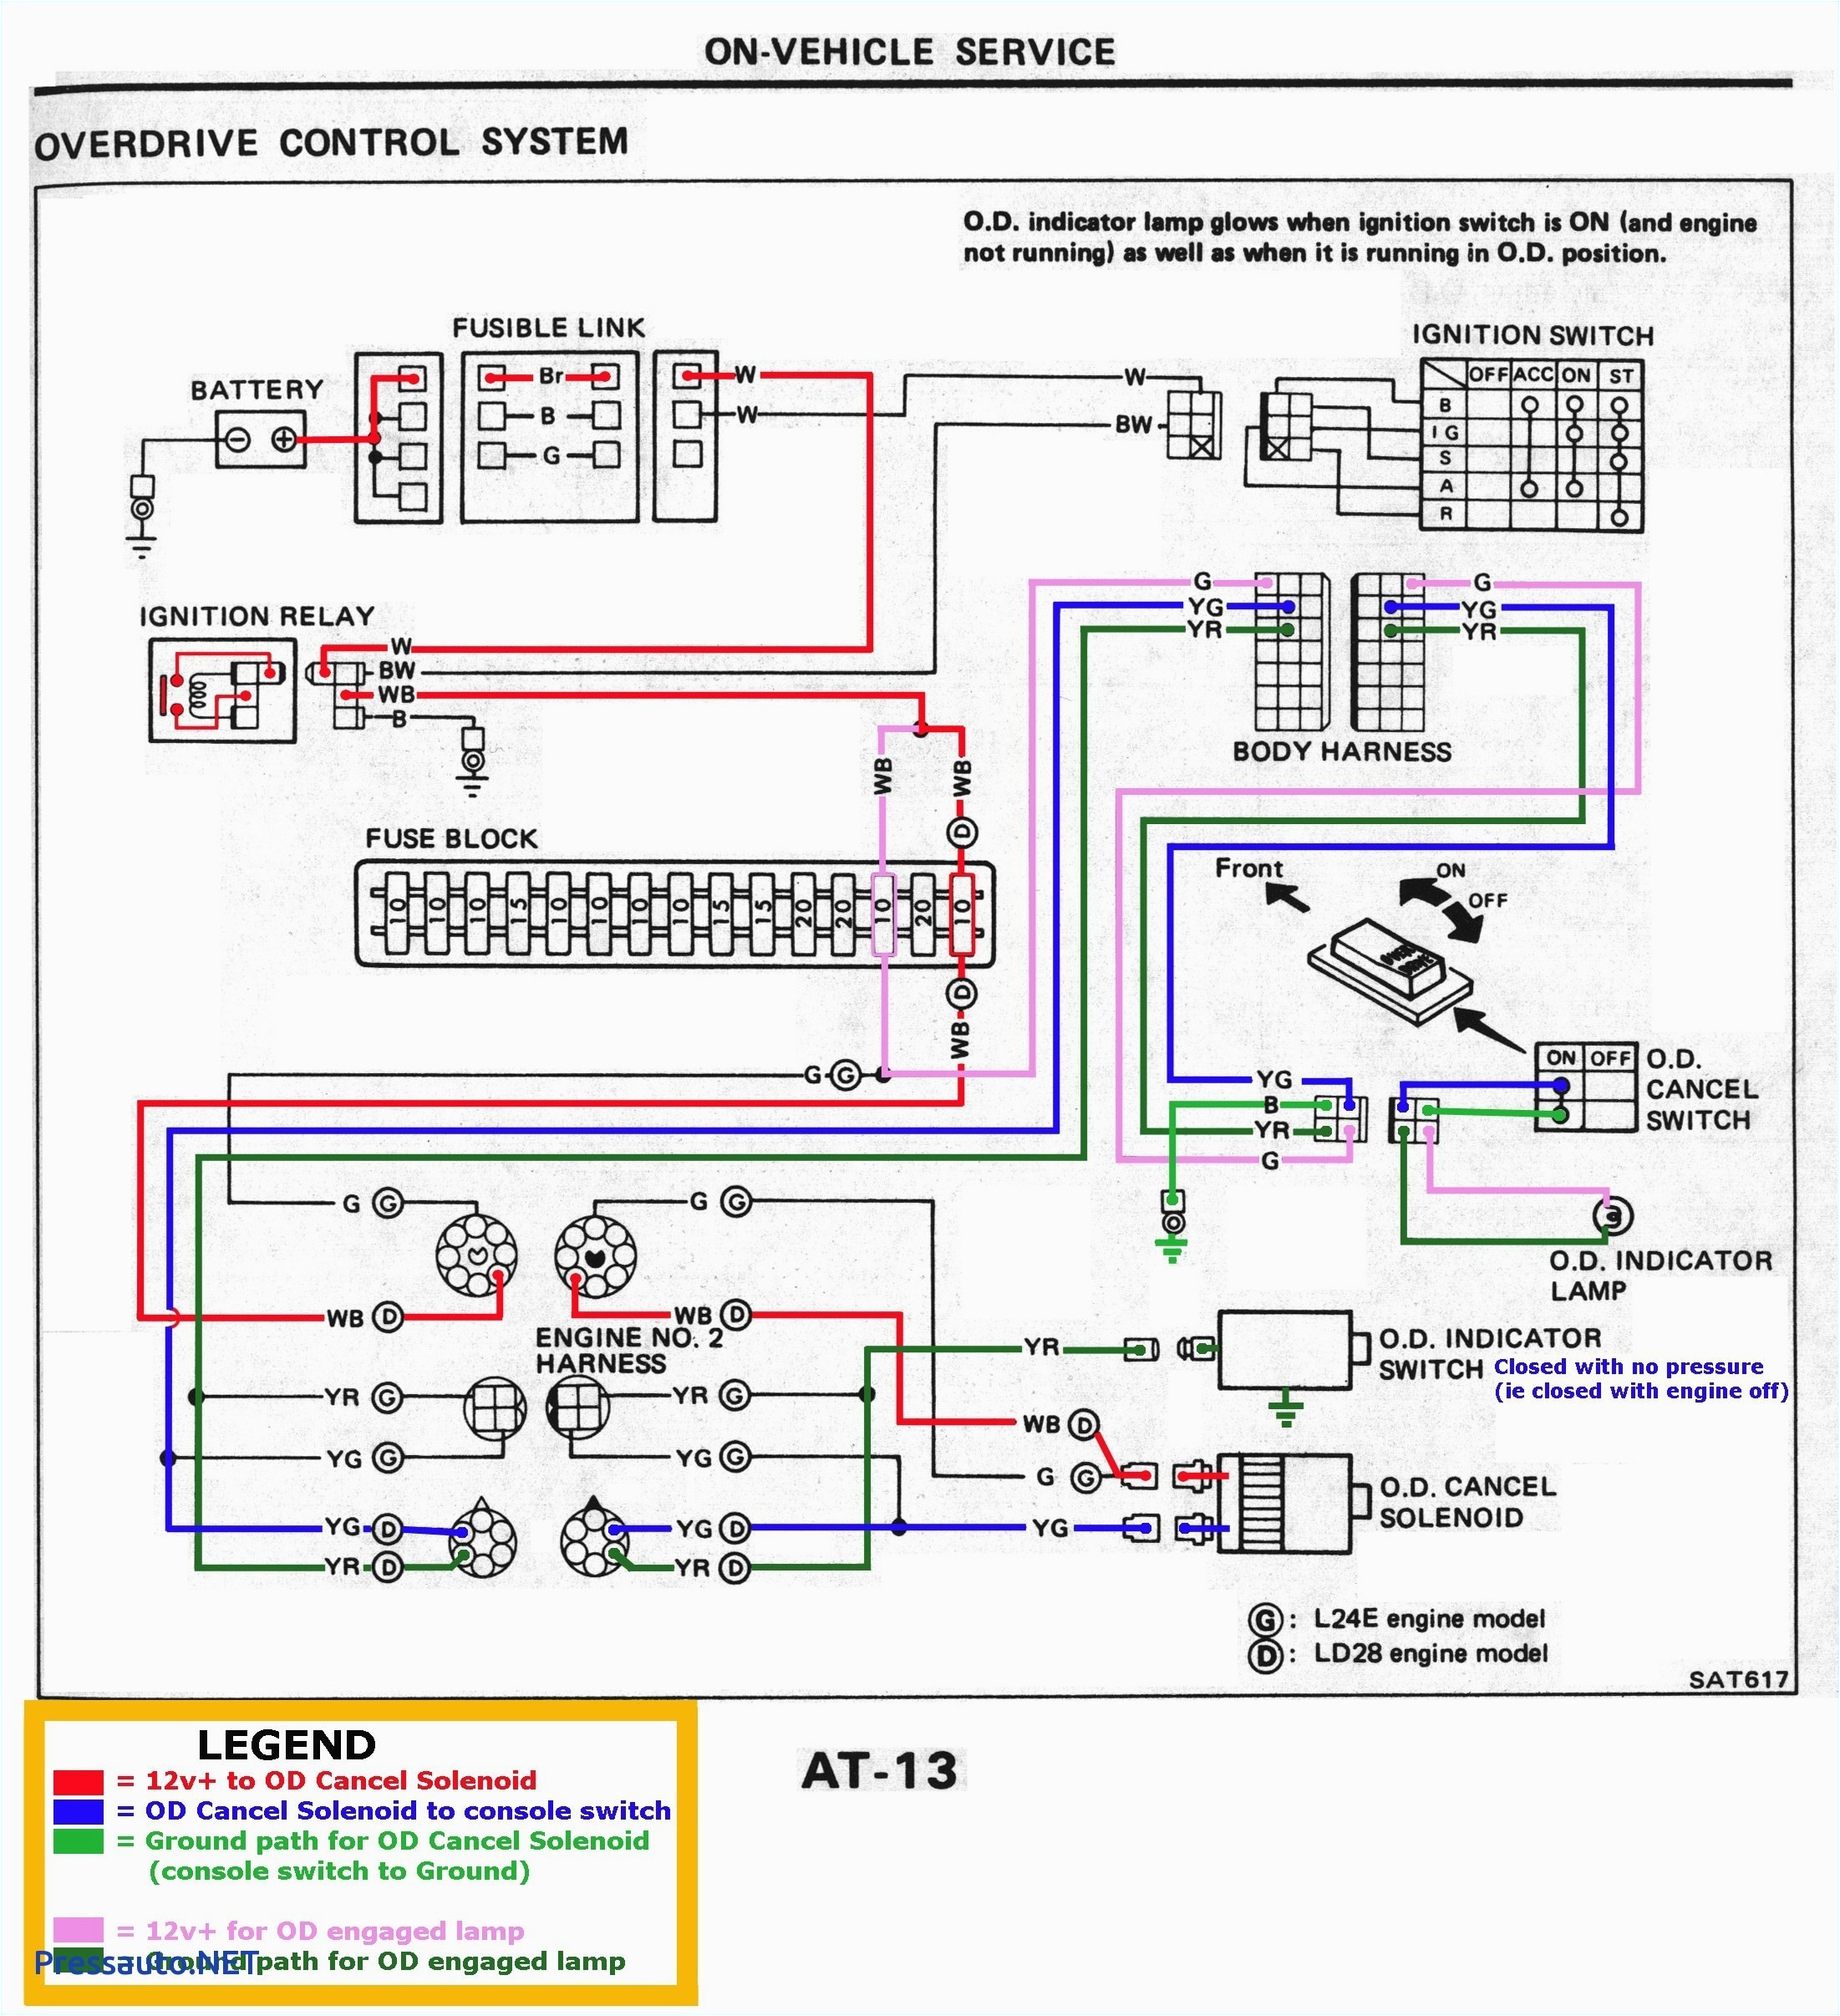 89 ford Ranger Radio Wiring Diagram ford Radio Wiring Schematic Wiring Diagram for You